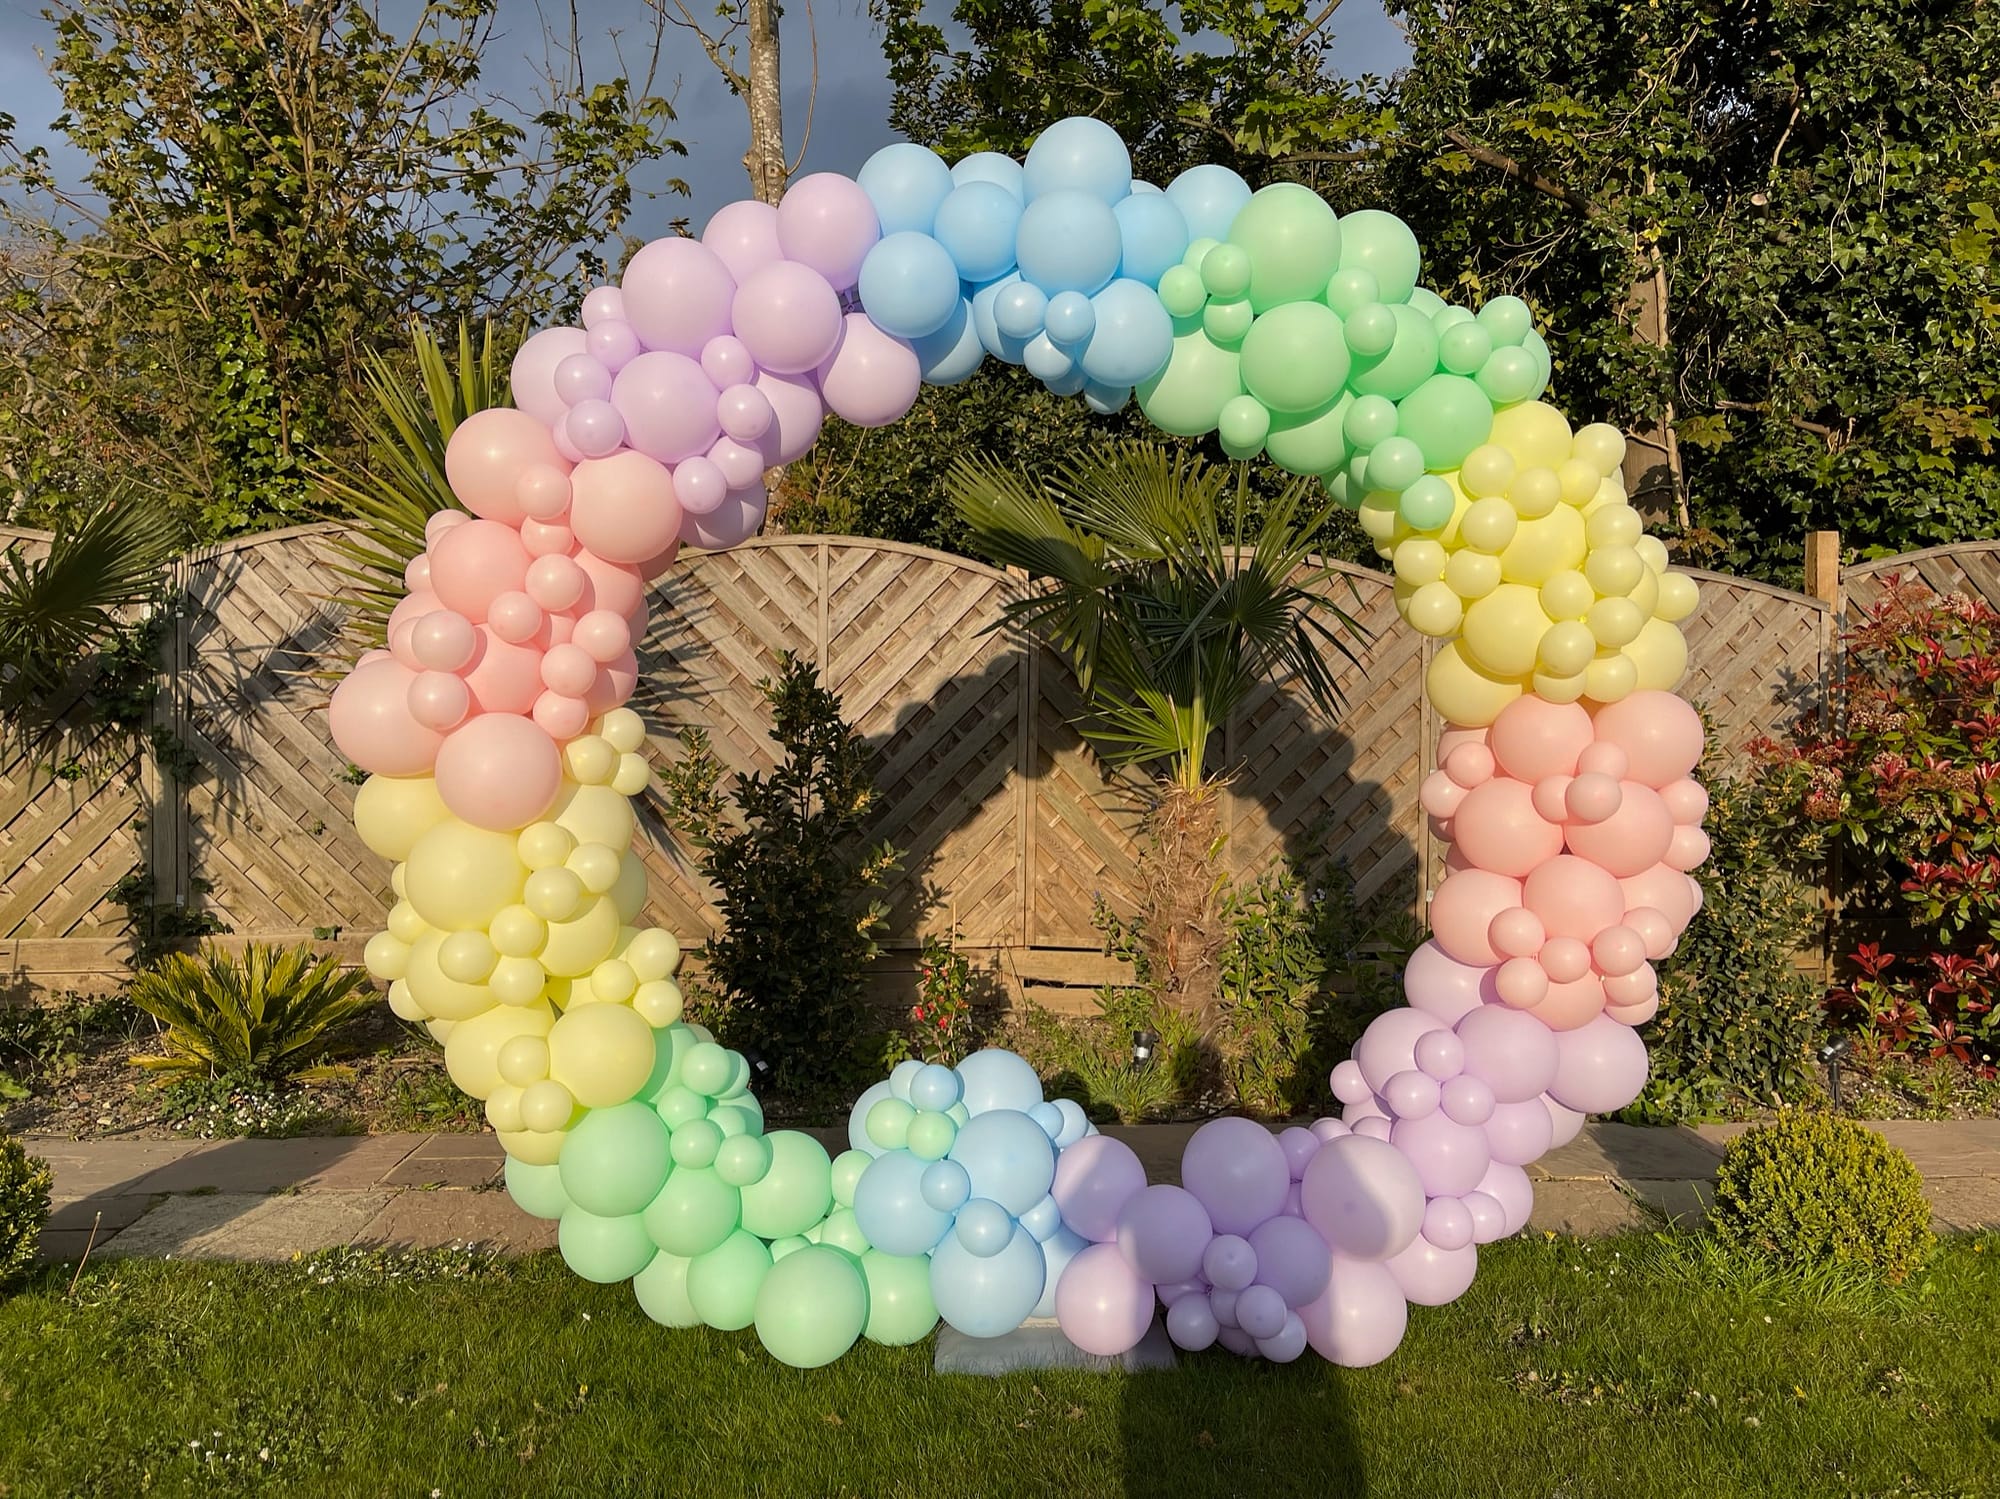 Circle of pastel colored balloons